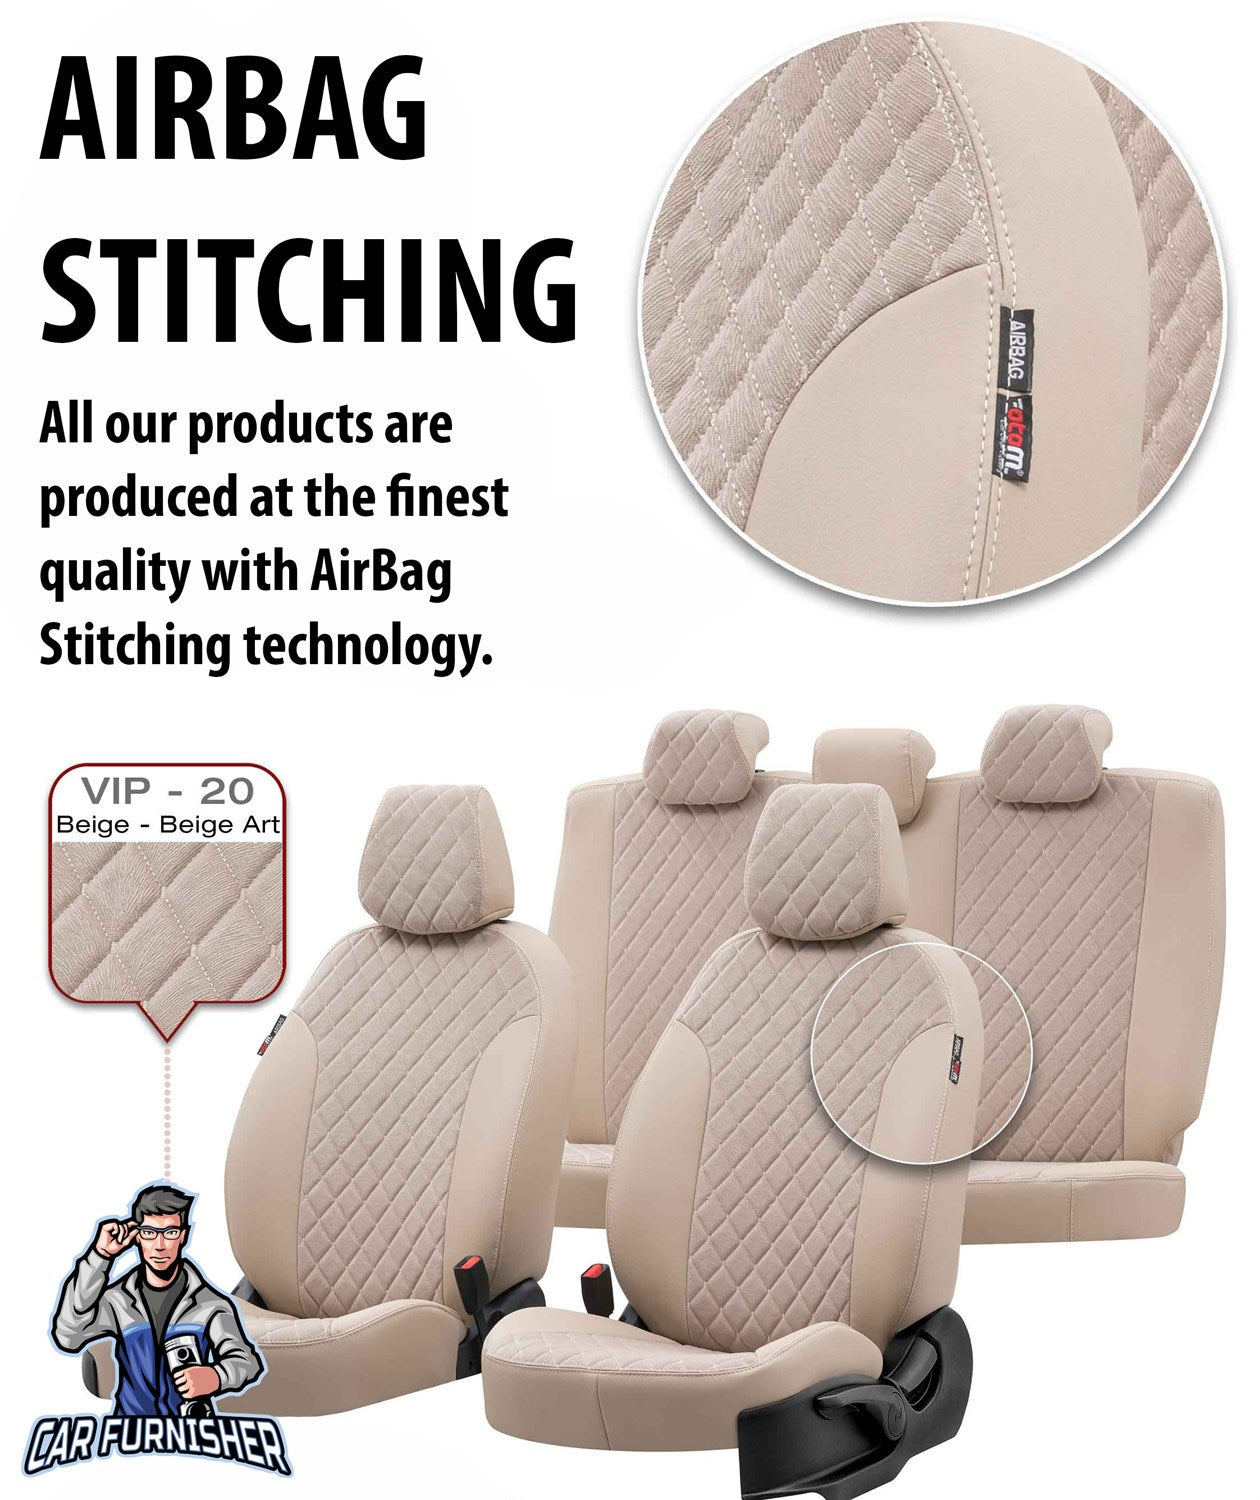 Isuzu L35 Seat Cover Madrid Foal Feather Design Beige Leather & Foal Feather